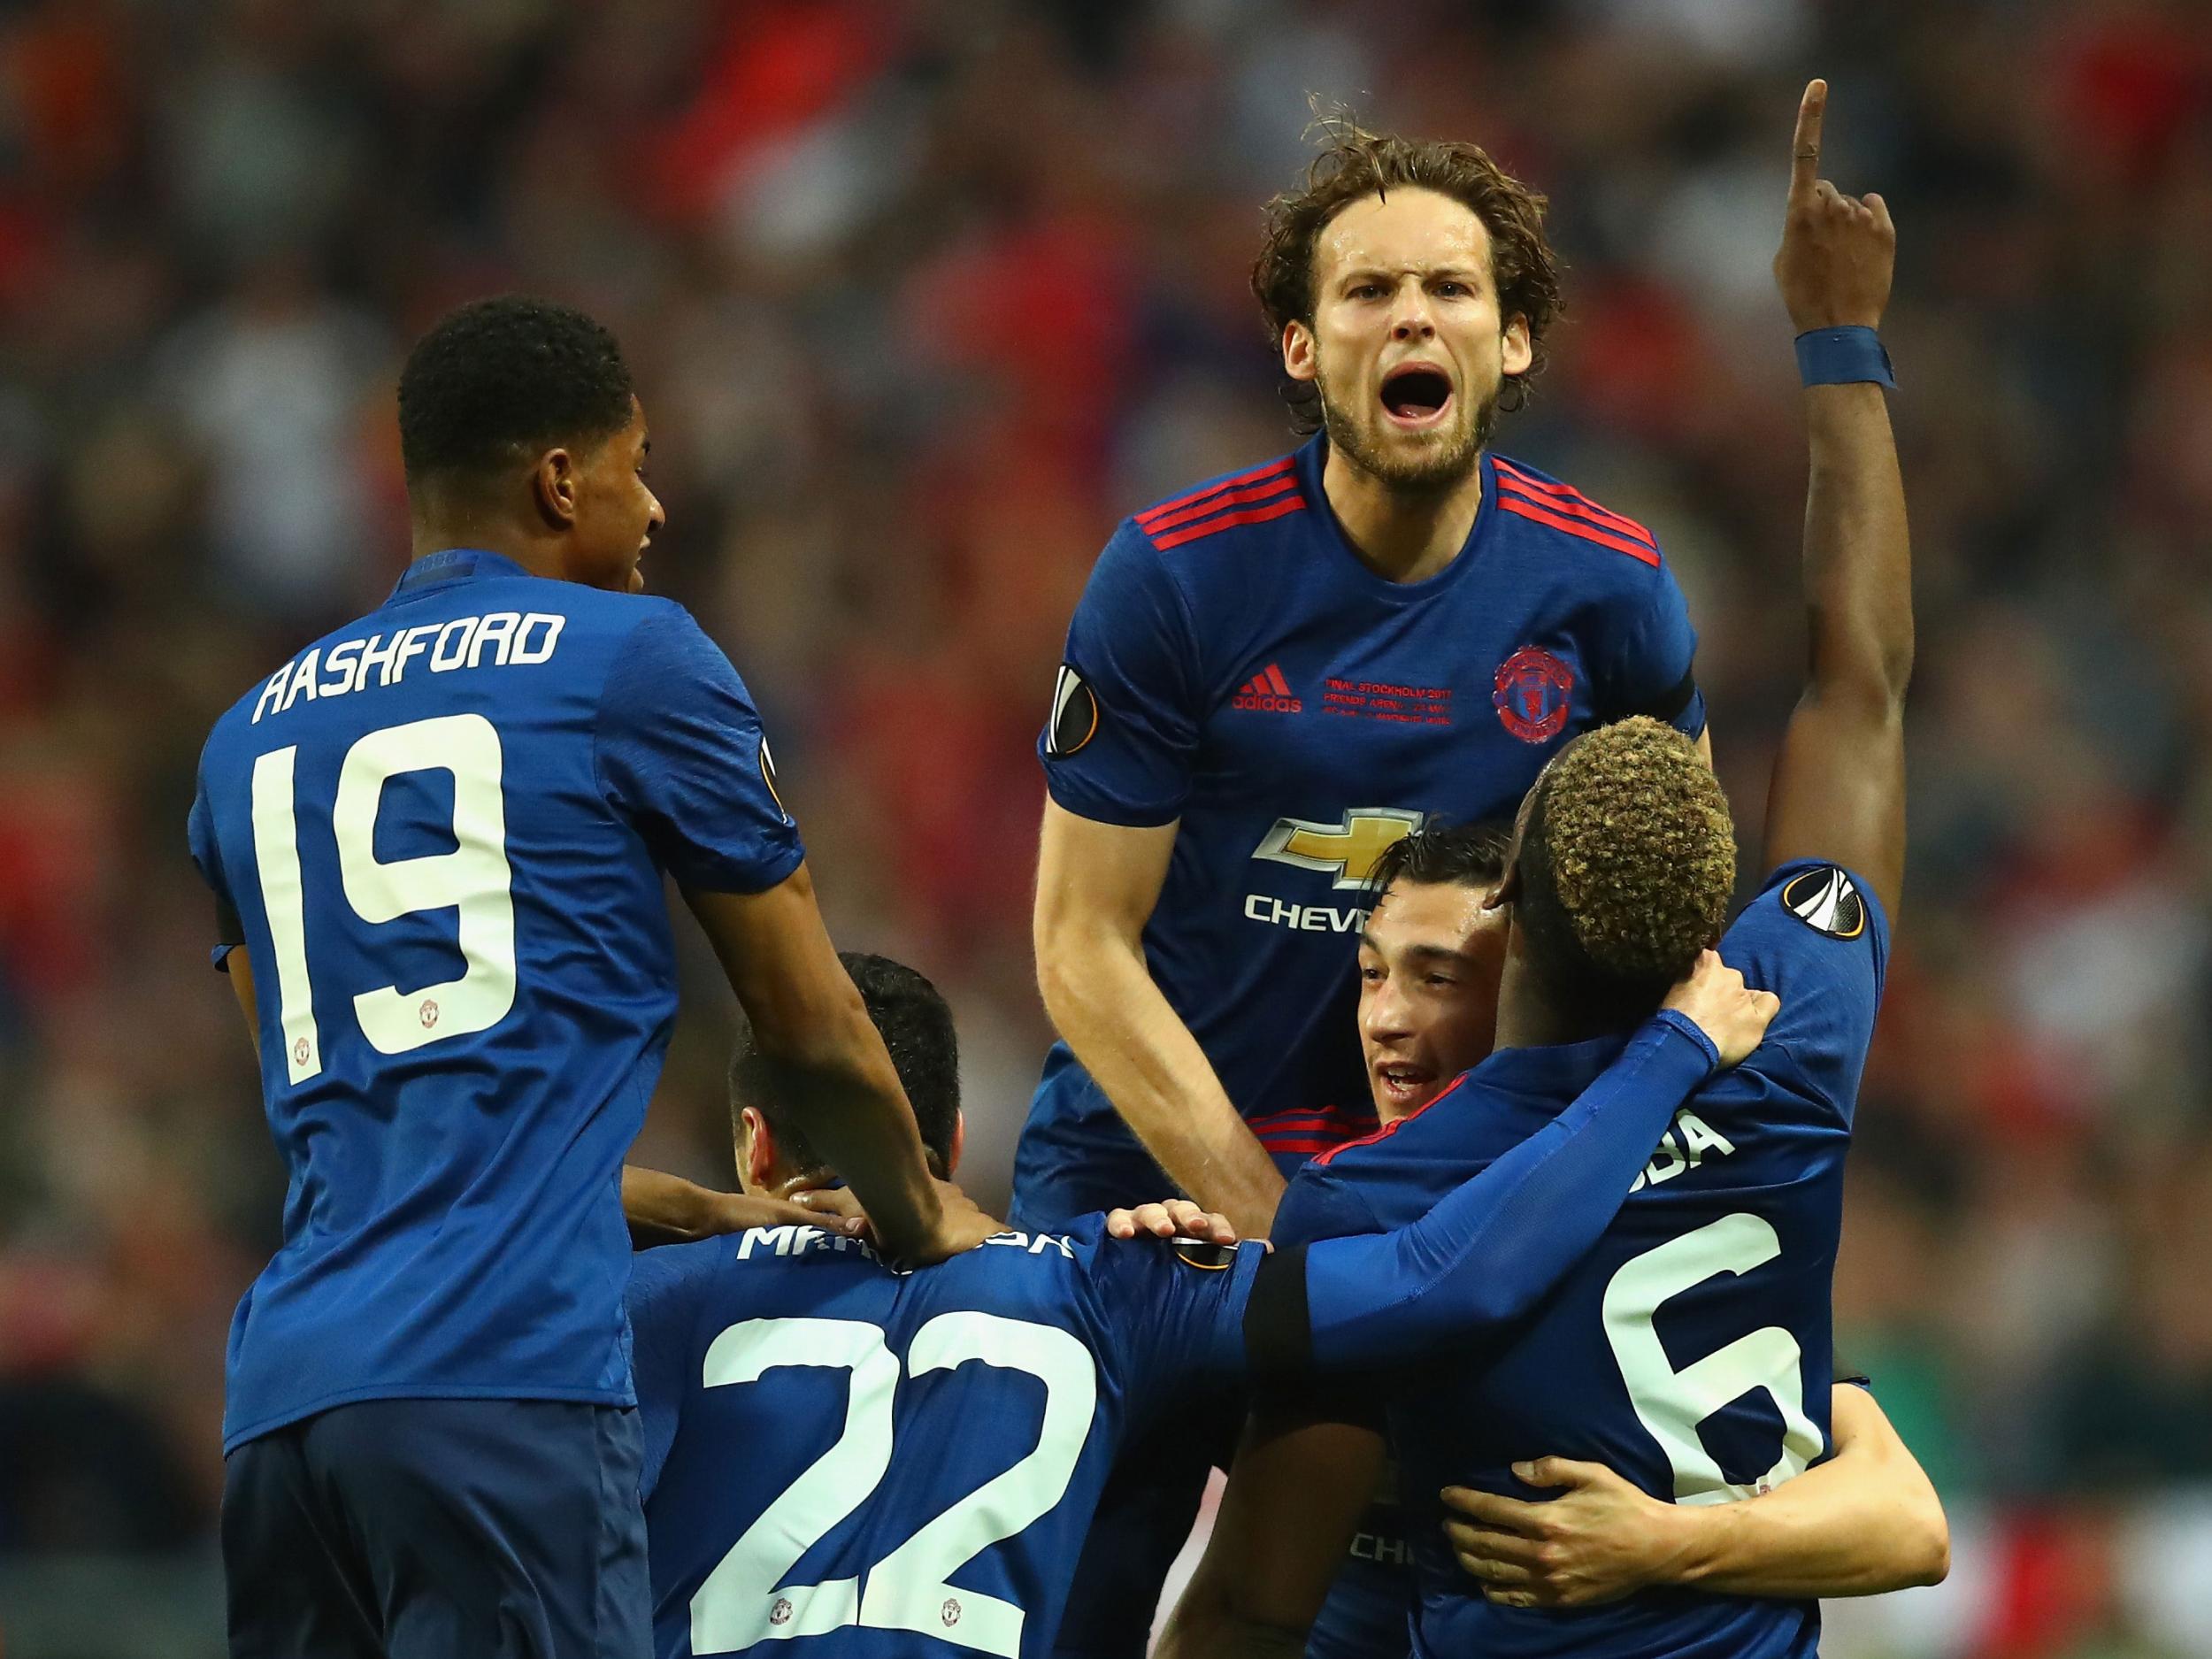 Manchester United will play in the 2017/18 Champions League after their Europa League victory